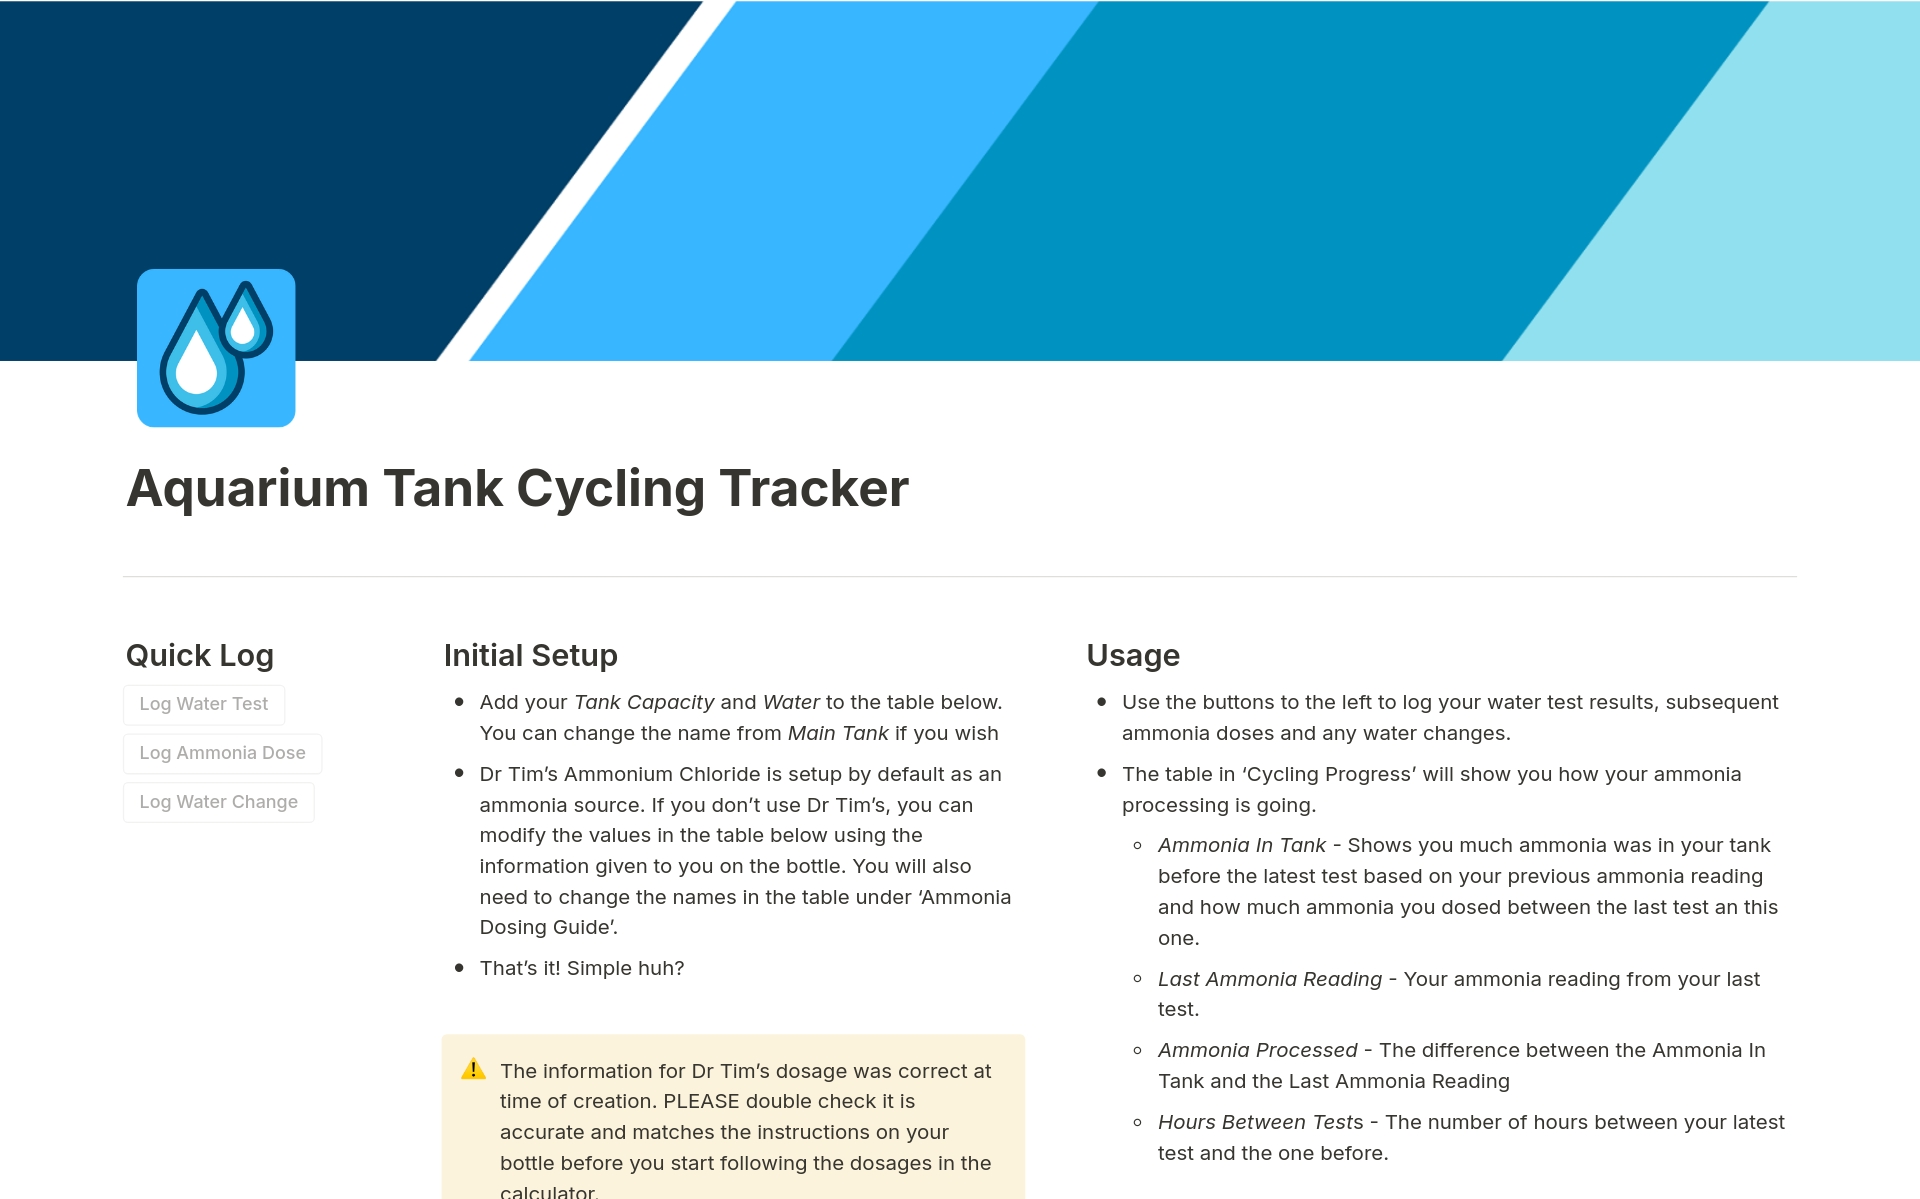 Aquarium Tank Cycling Tracker allows you to quickly and effortlessly track the cycling of your aquarium tanks.